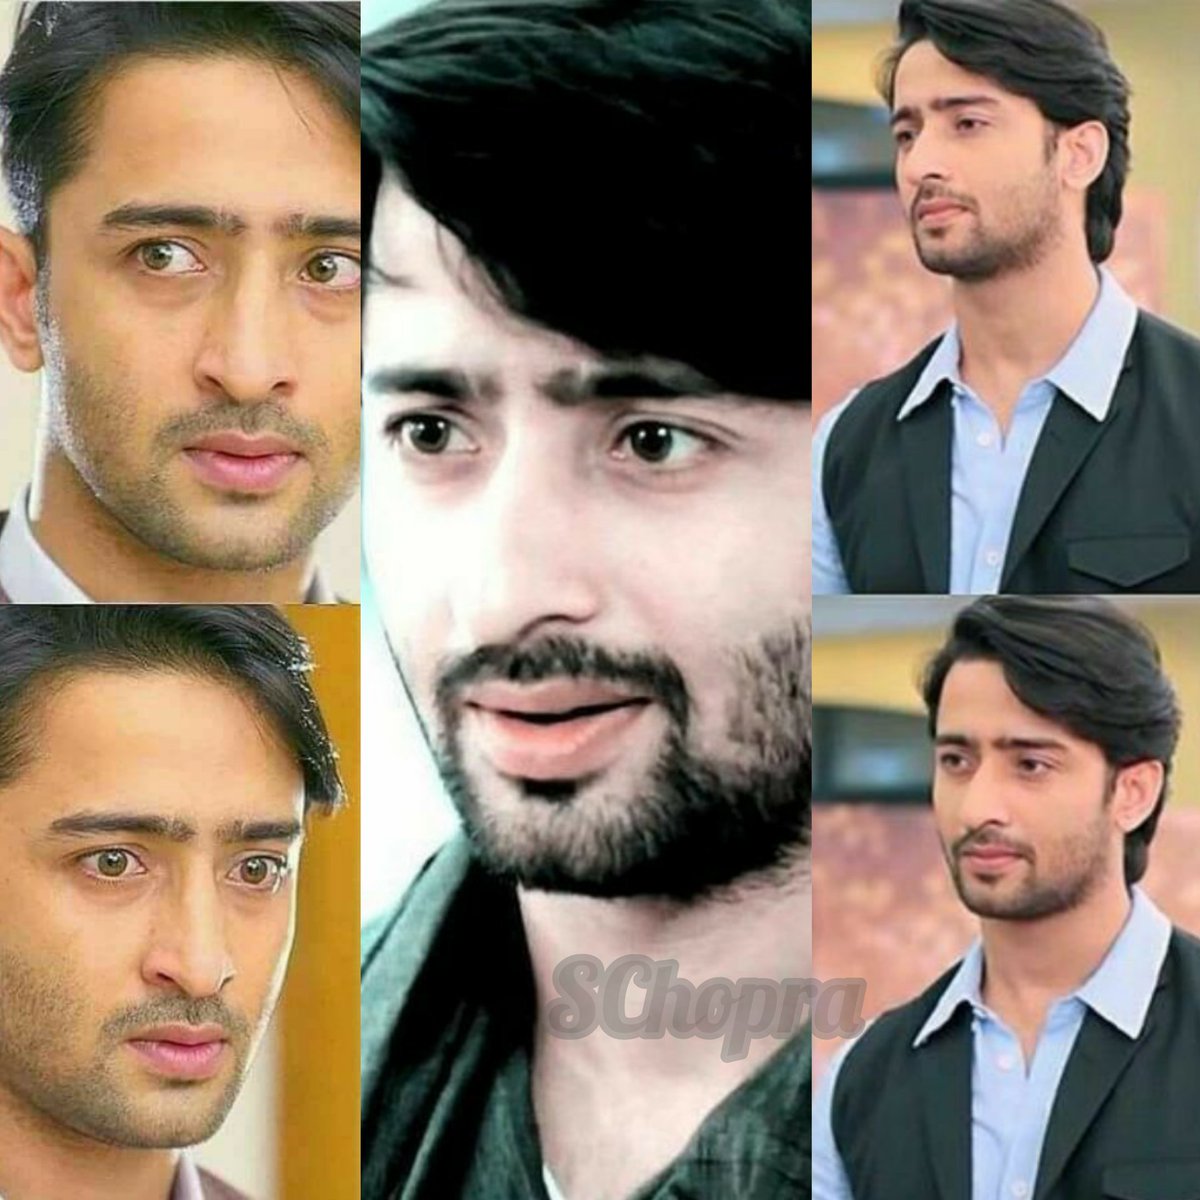 @shaher_x_papali @Shaheer_S @ShaheerBirdieFC @yukti_gulki_fc @Dd72387152 @HetalPrabhakar1 @Priya_ShahStan I'm vry impressed with ur acting,especially as Dev,I'm totally hooked with Dev,ur versatility is commendable,ur eyes speak,ur emotions perfection is amazing,during d lockdown I came to knw more abt U as an actor&as a person,But Dev is my medicine tht keeps my life well @Shaheer_S